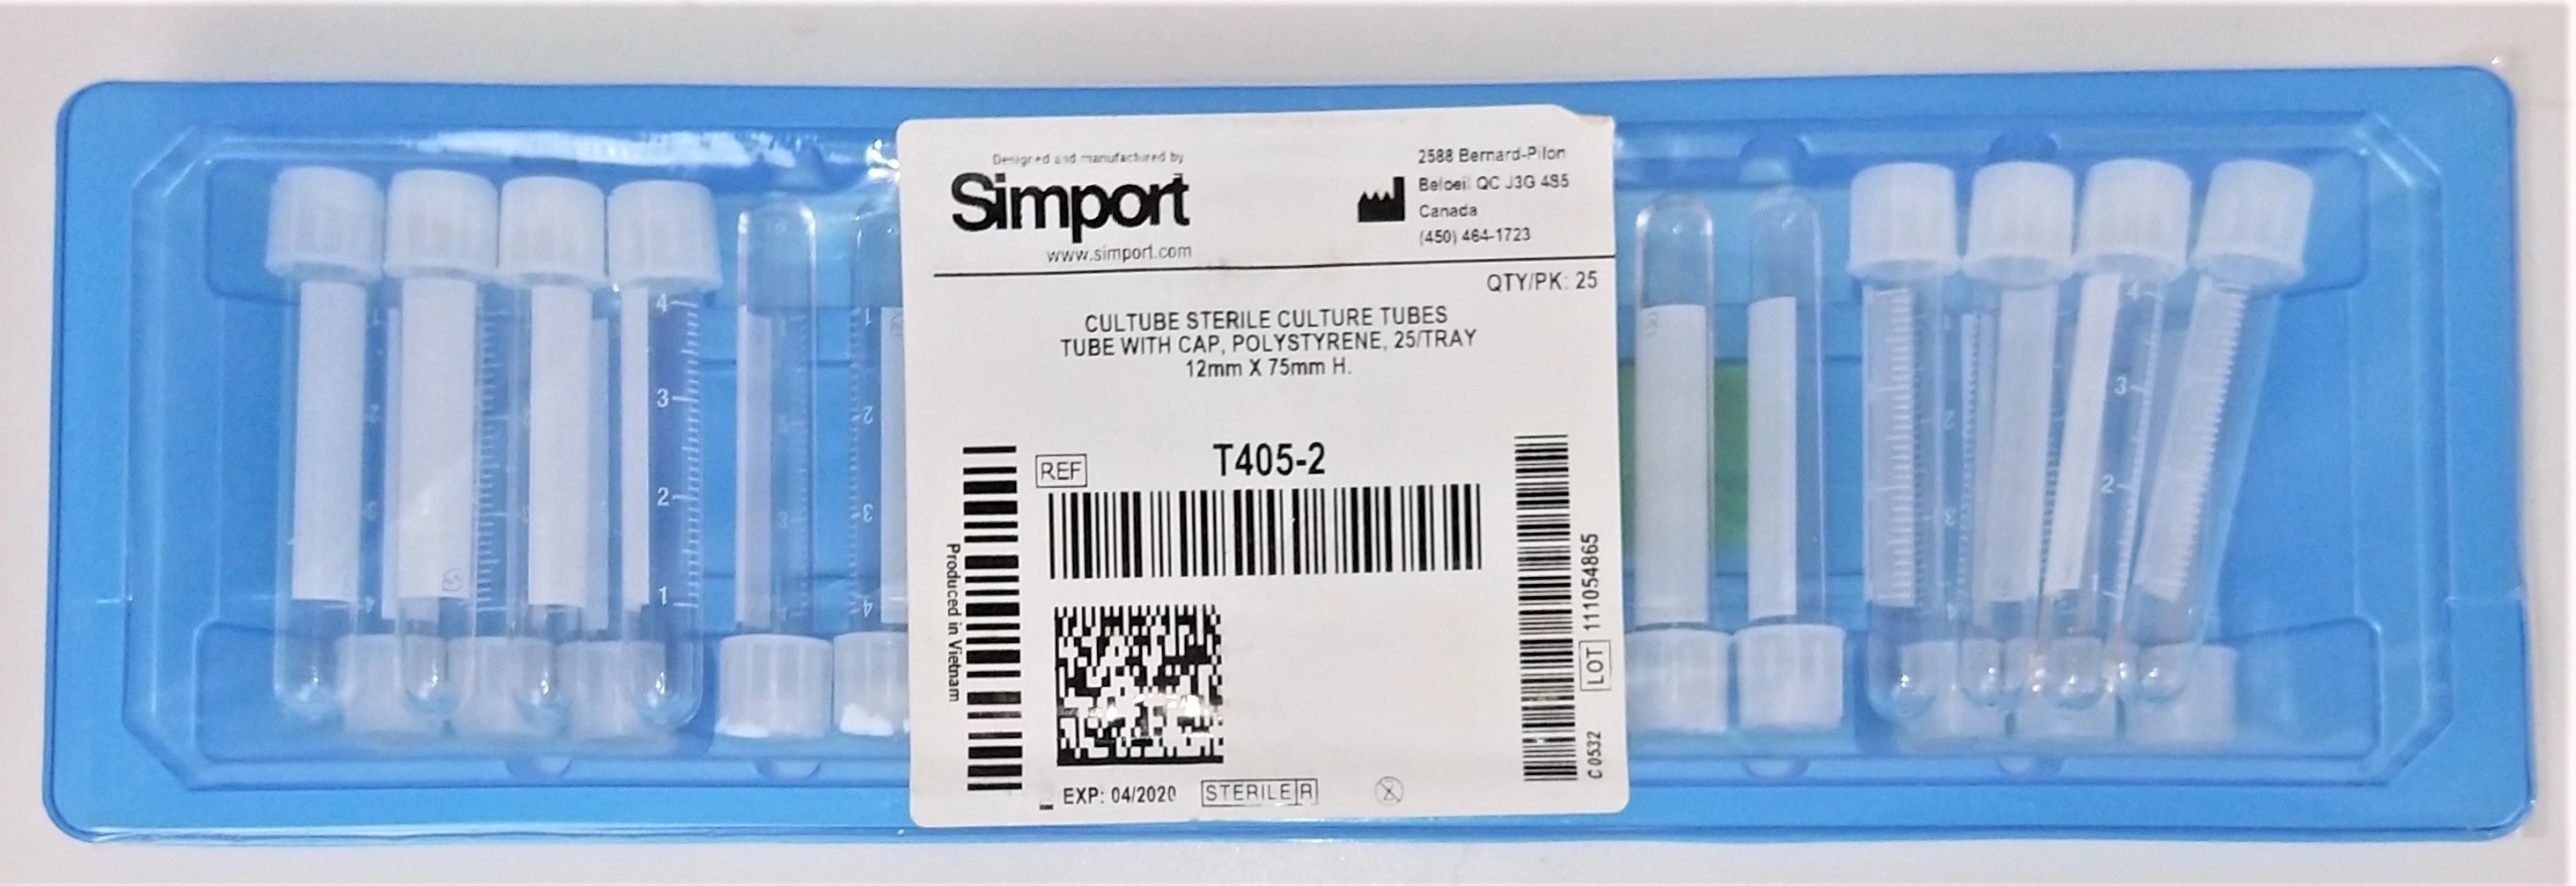 Simport Cultubes T405-2 Sterile, Disposable Culture Tubes (Tray of 25)